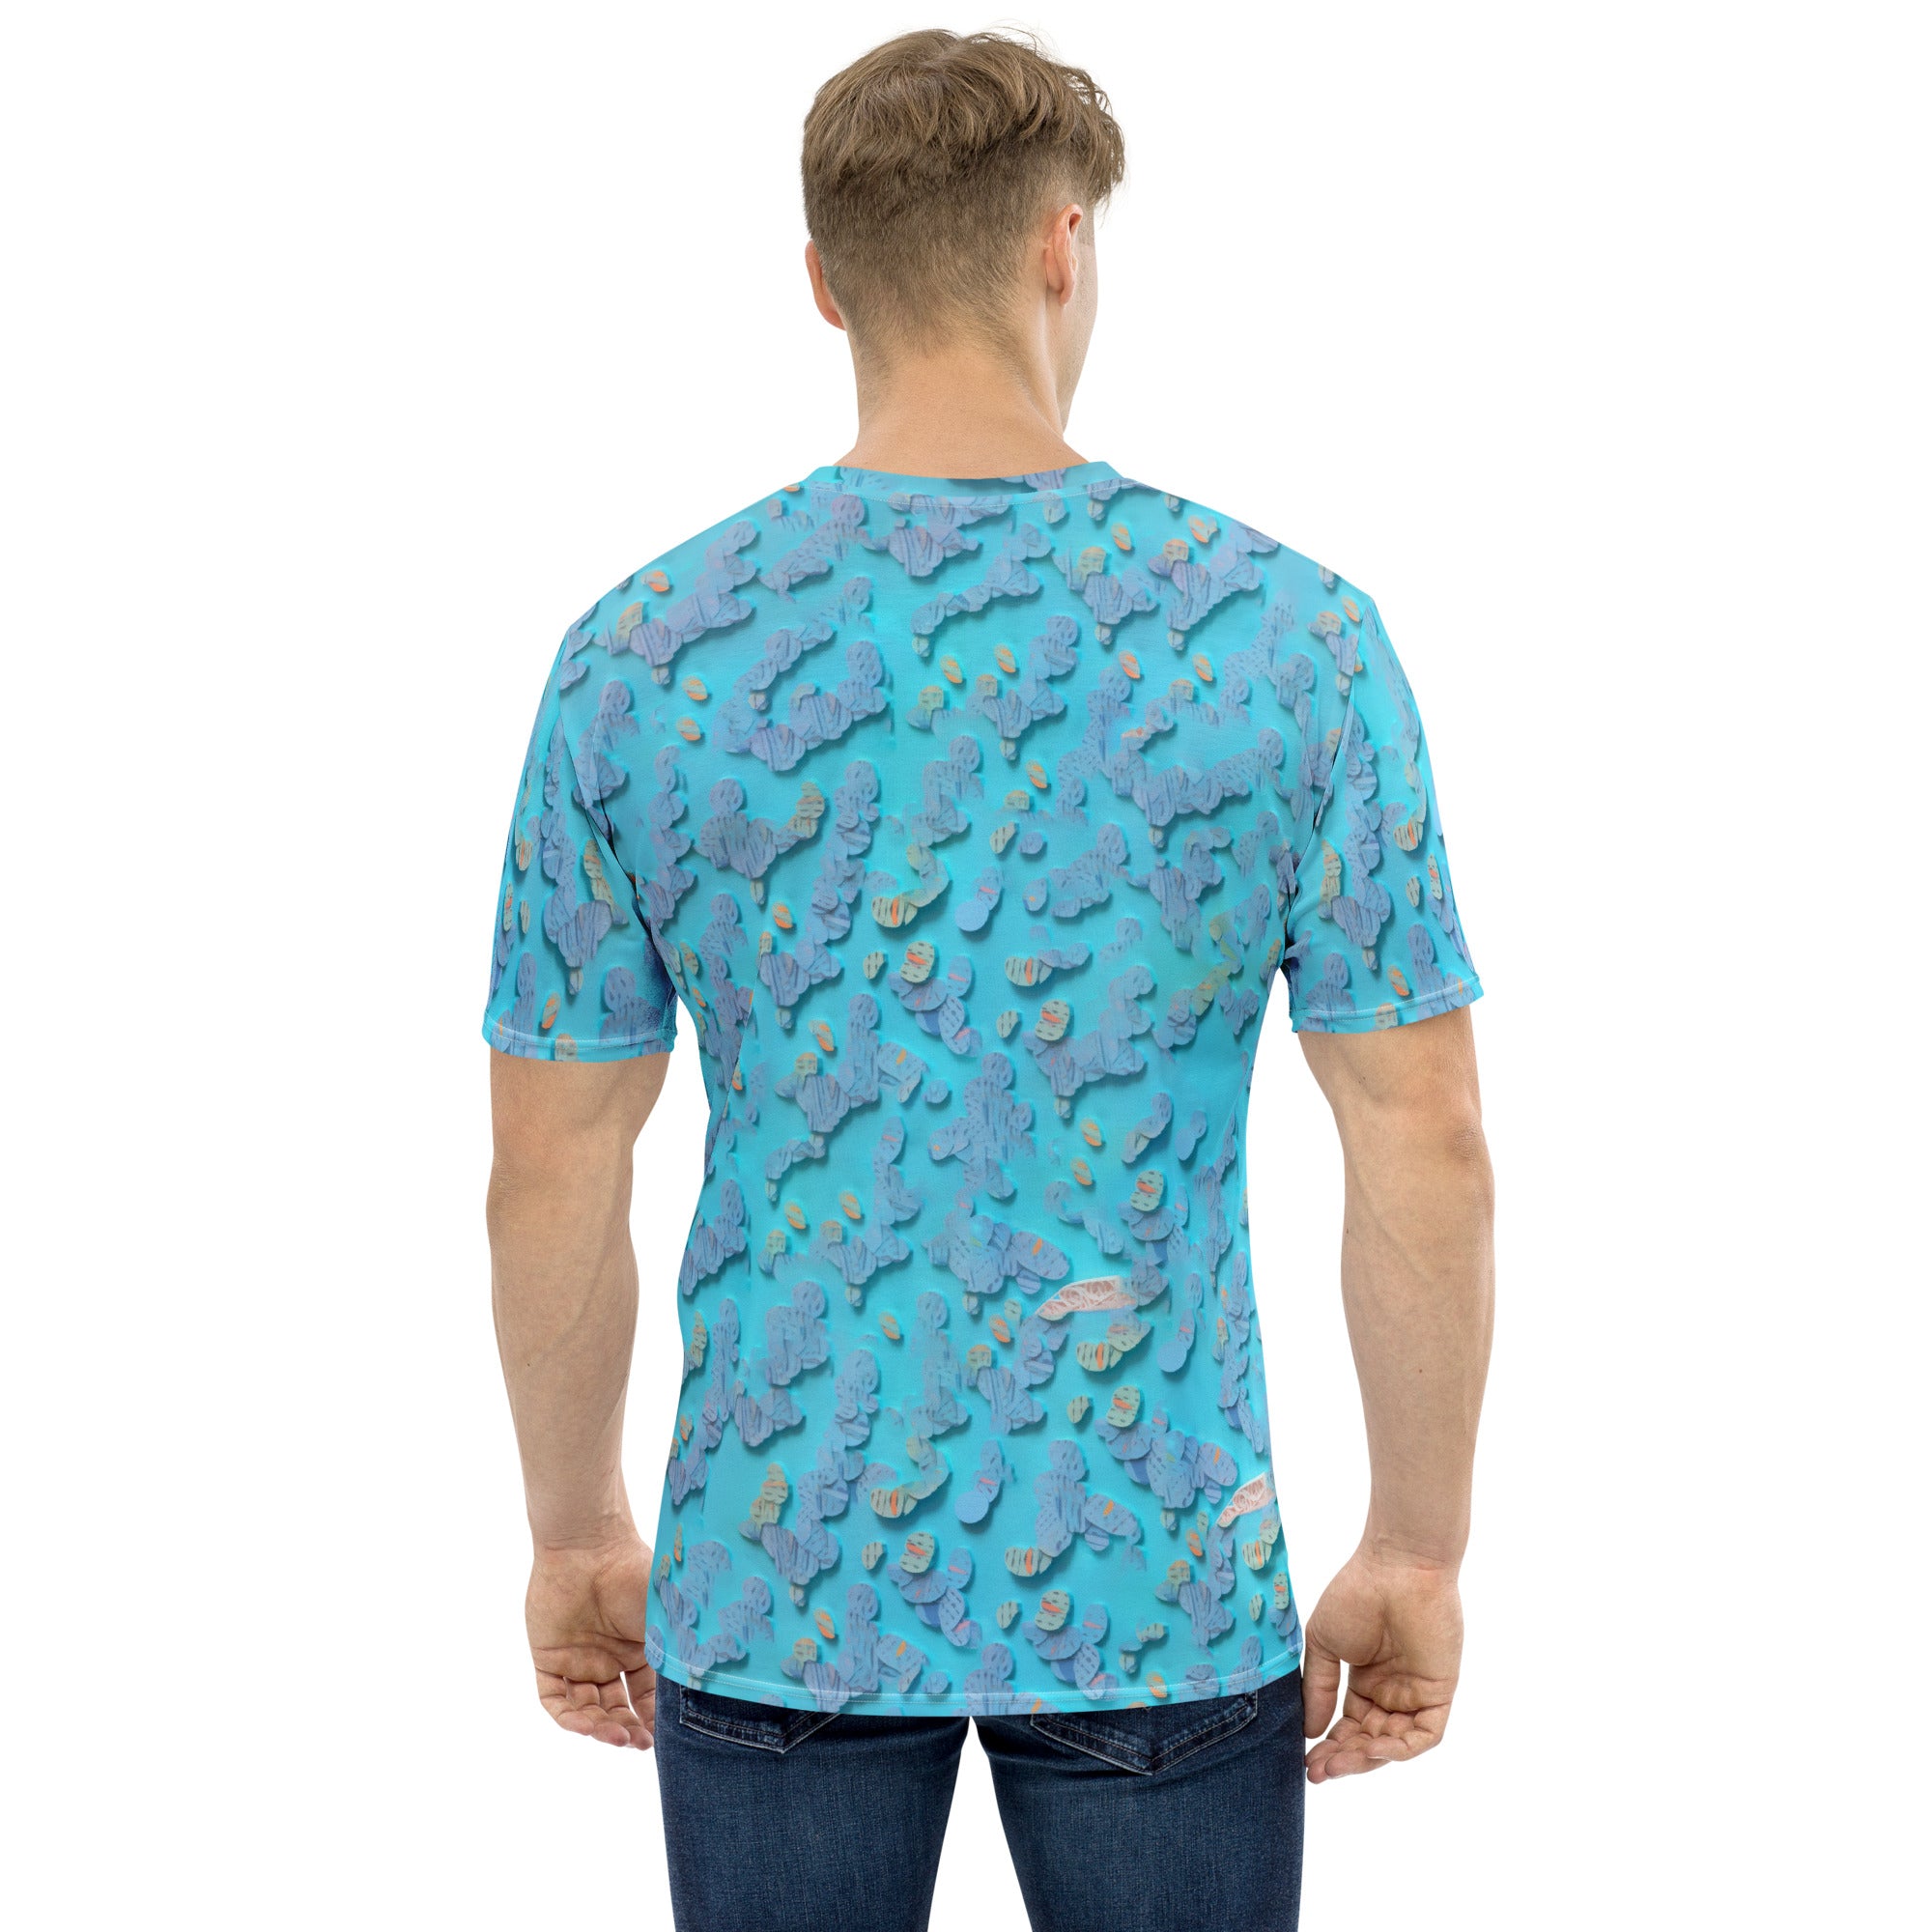 Music-themed Men's Crew Neck Tee with Electric Guitar Print